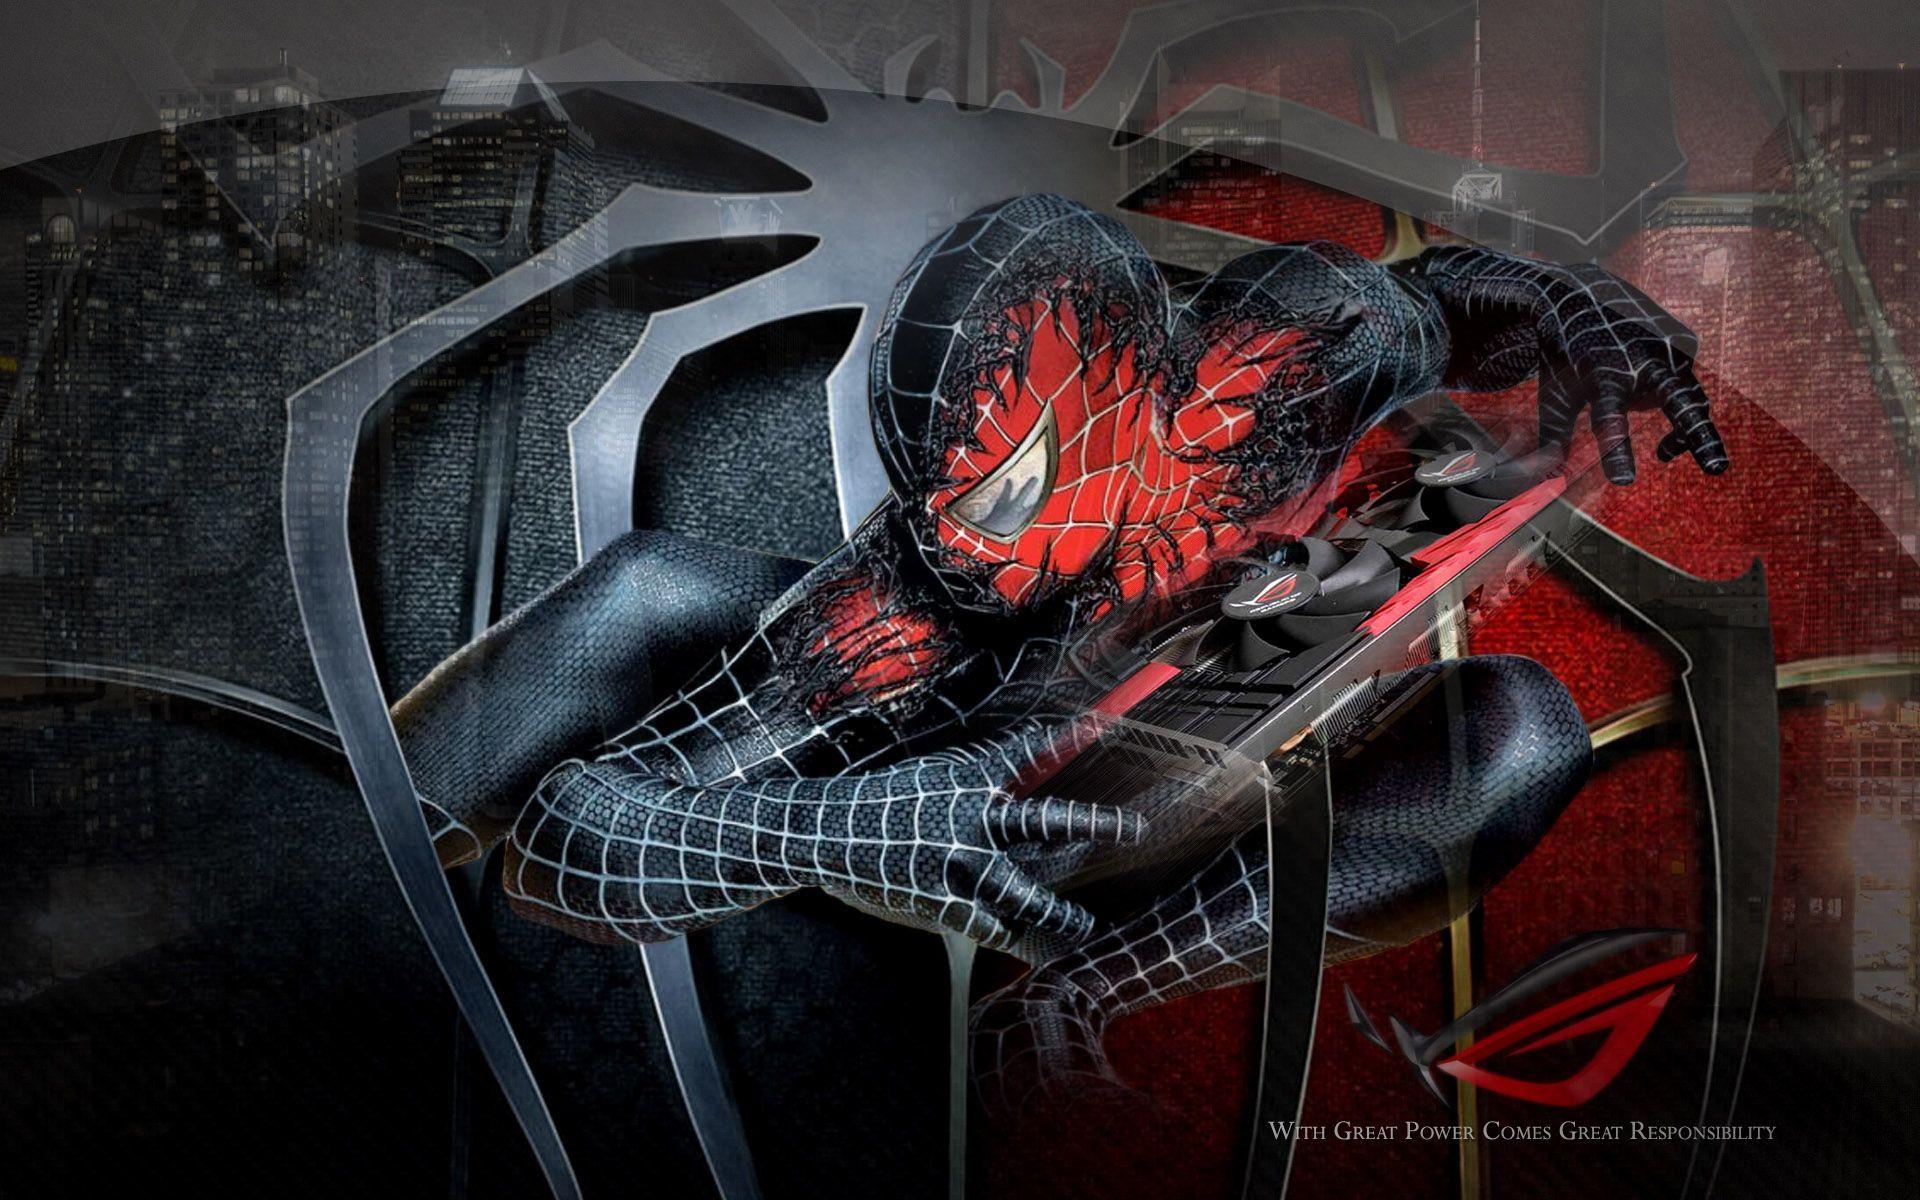 Spiderman Wallpaper Collection For Free Download. Man wallpaper, Spiderman, Amazing spiderman